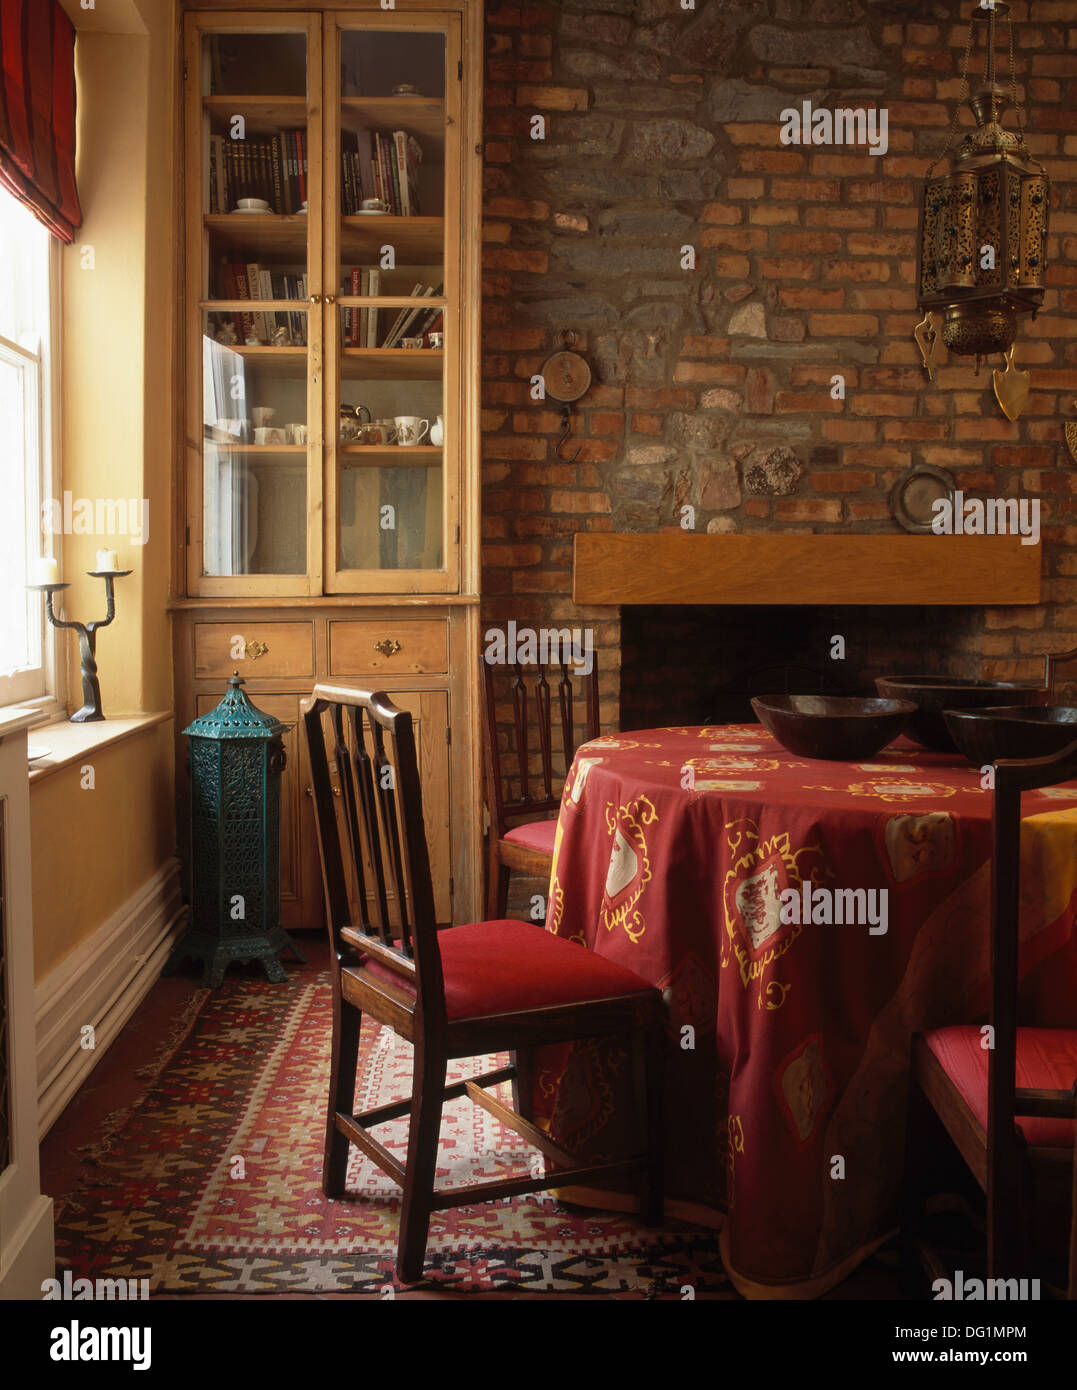 Narrow dresser and table with patterned red cloth in traditional dining room with exposed brickwork above the fireplace Stock Photo